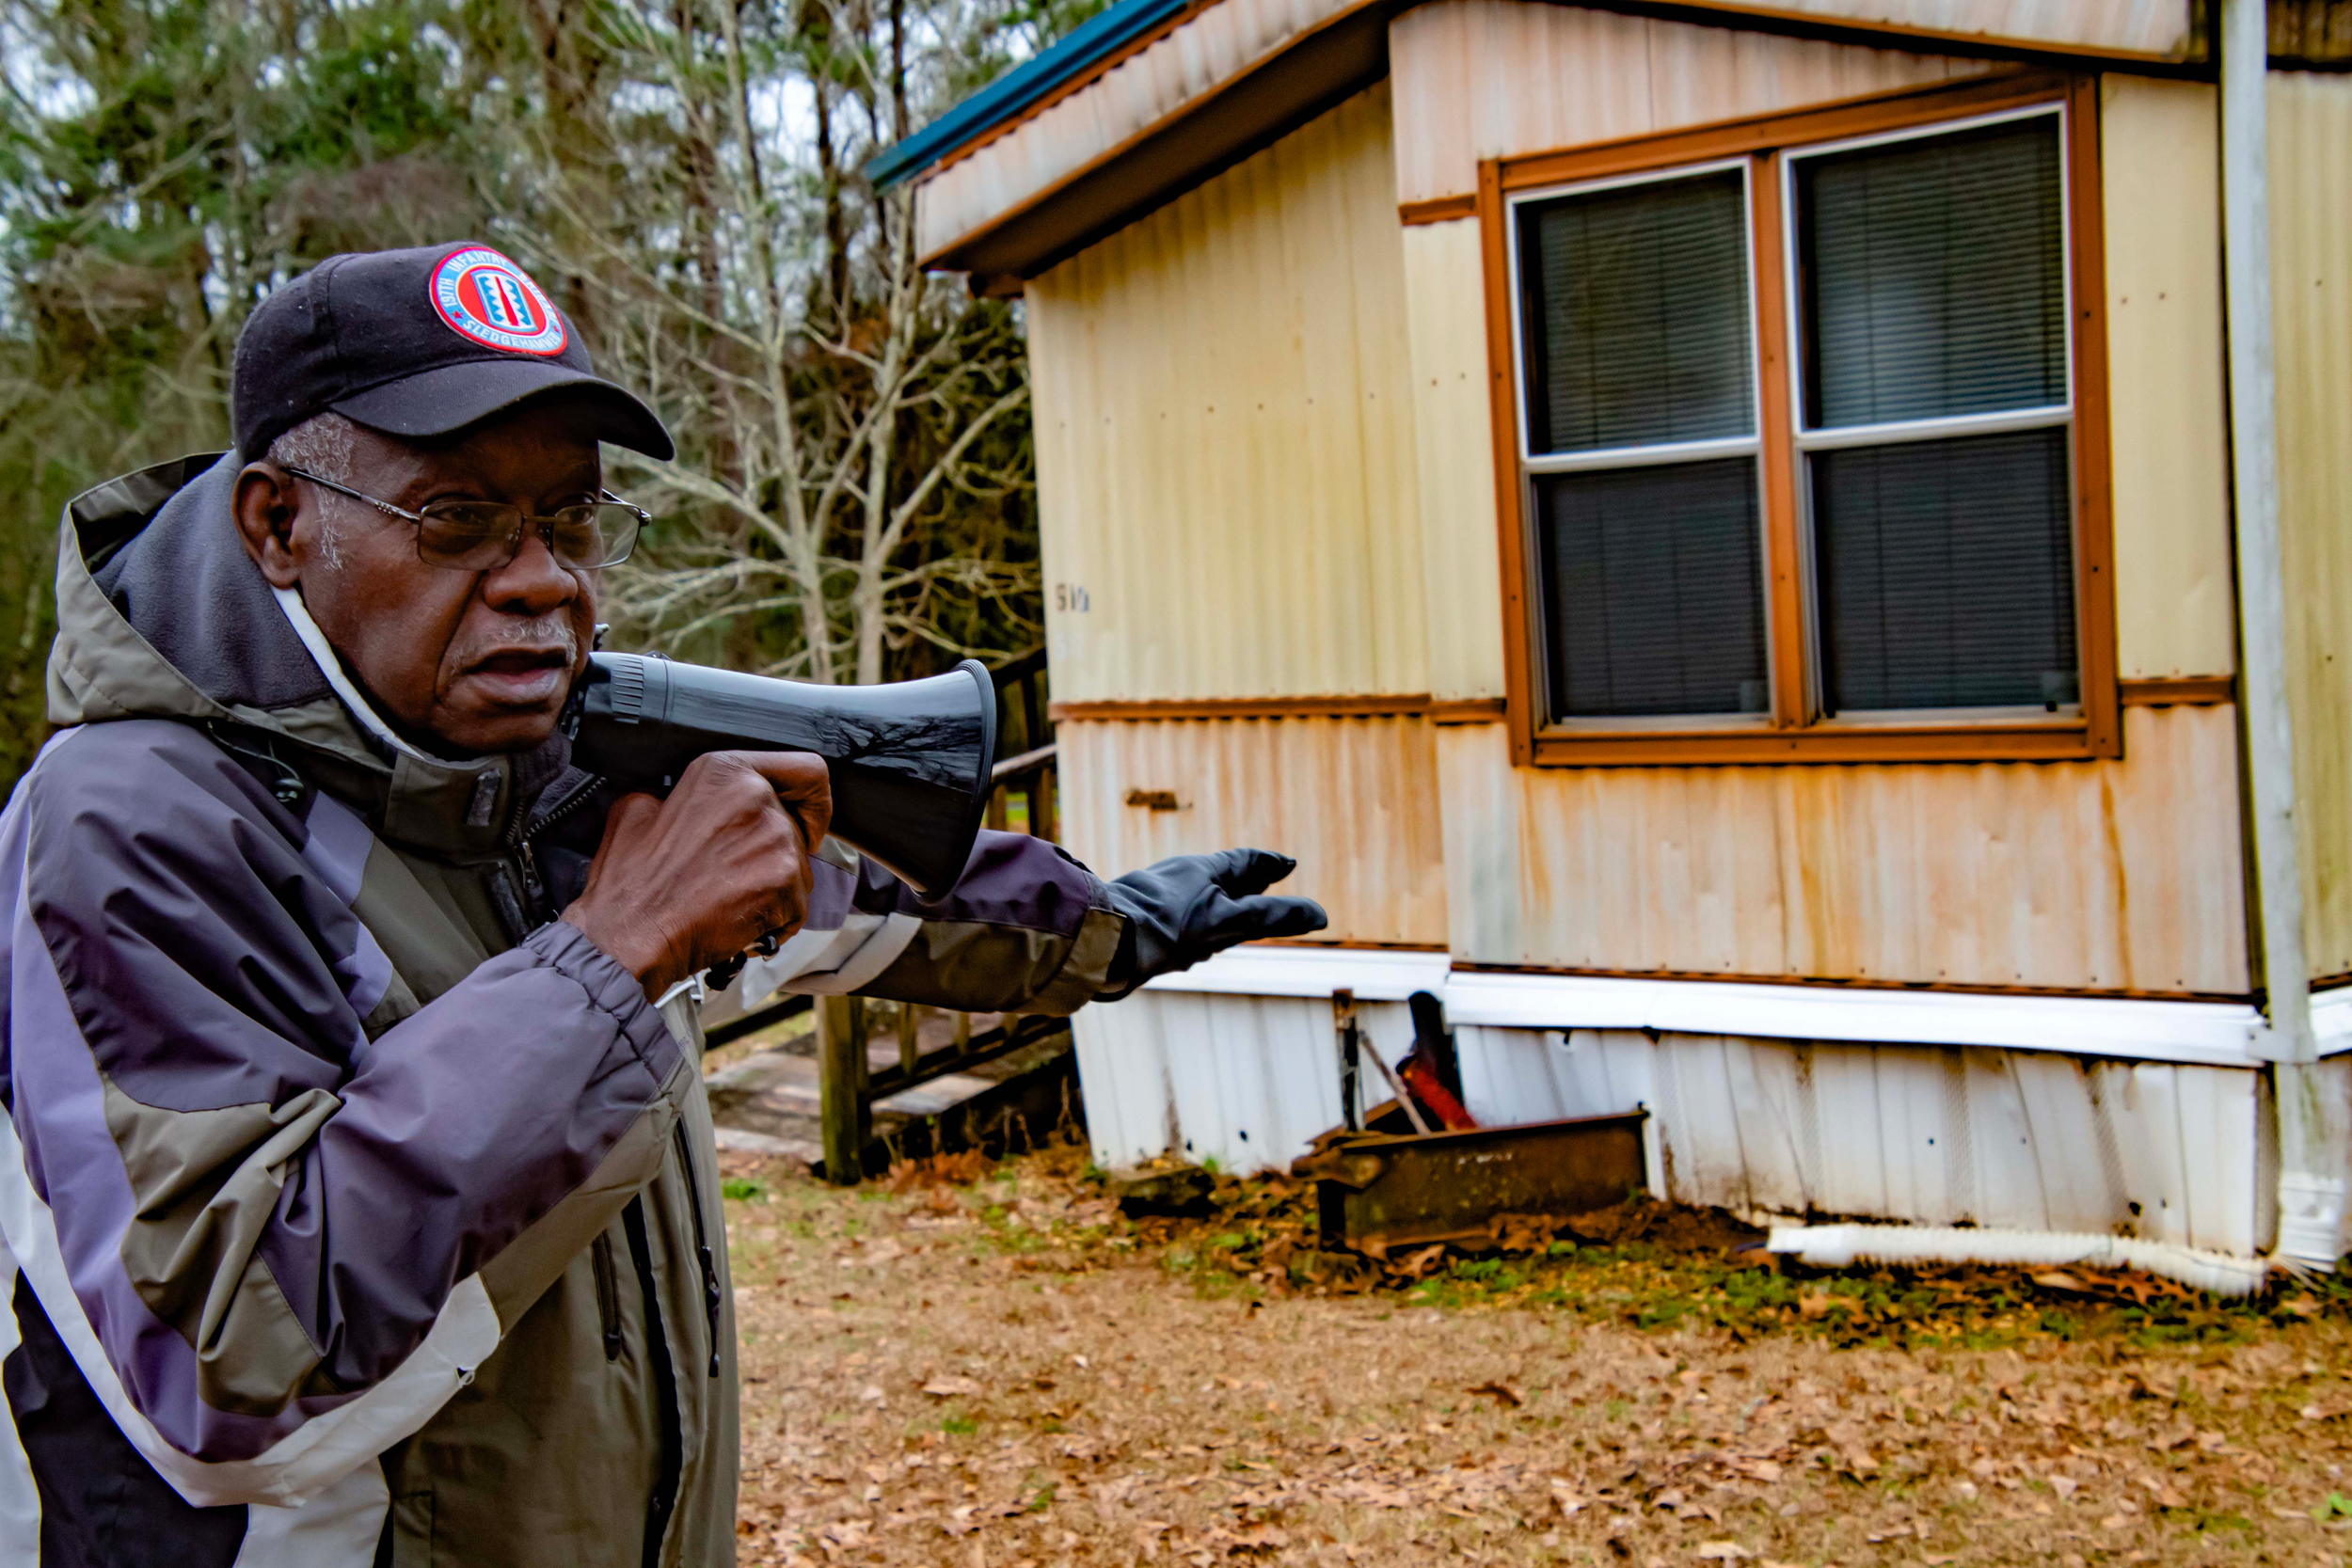 Willie Horstead Jr.'s home is sinking. He describes the situation to those on the community tour. Credit: Lee Hedgepeth/Inside Climate News